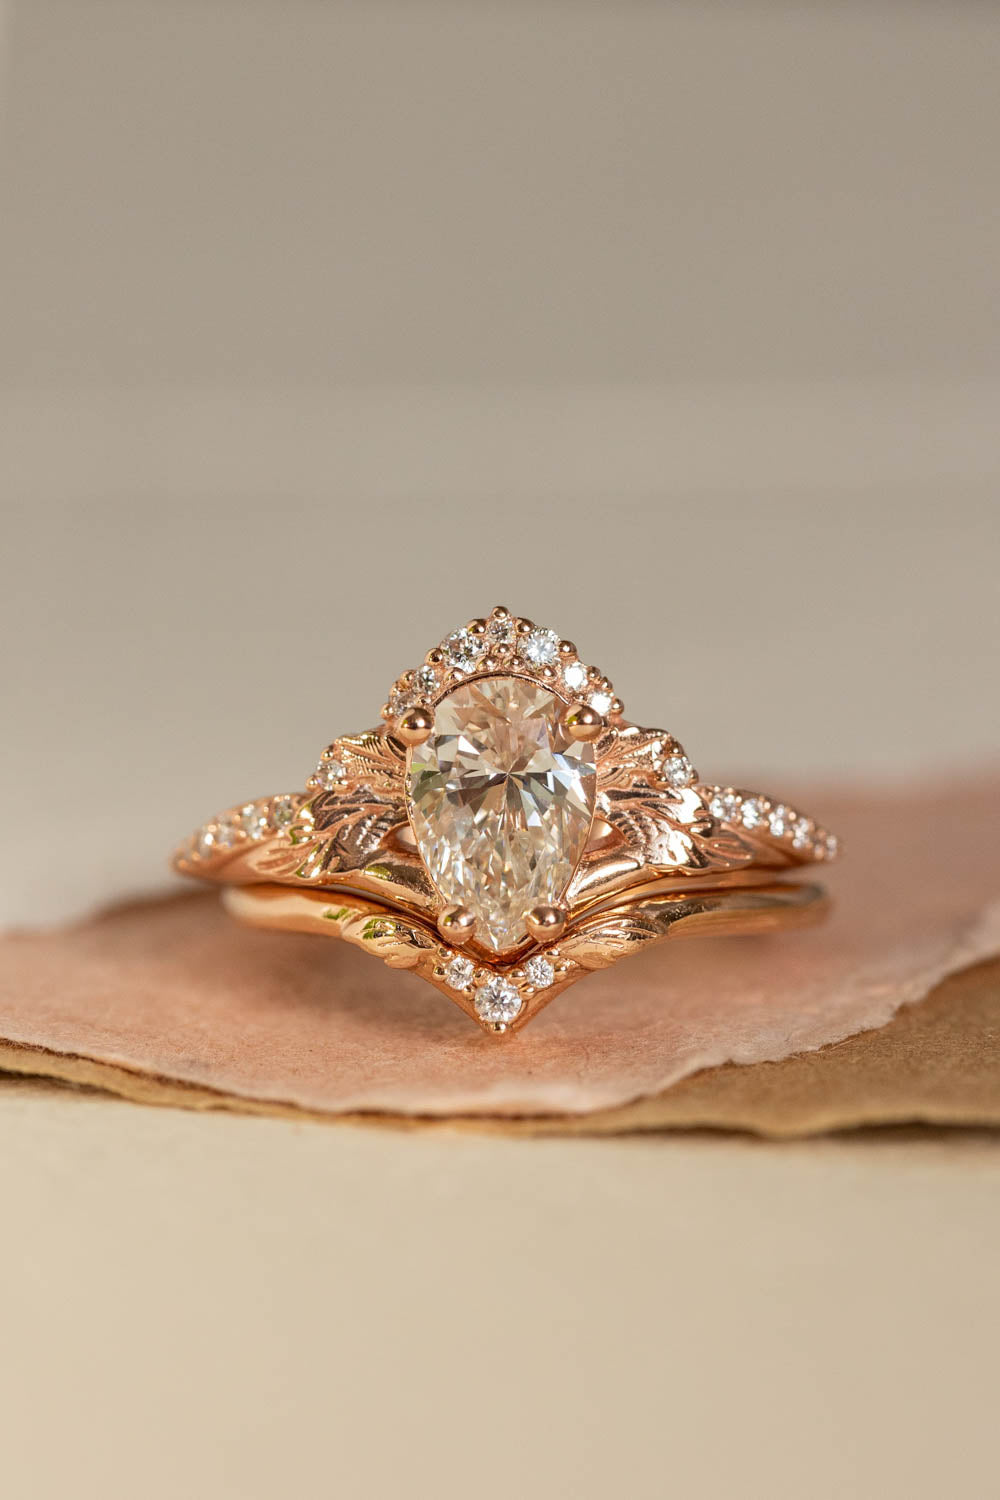 Crown Engagement Ring Set with Pear Cut Diamonds – ARTEMER